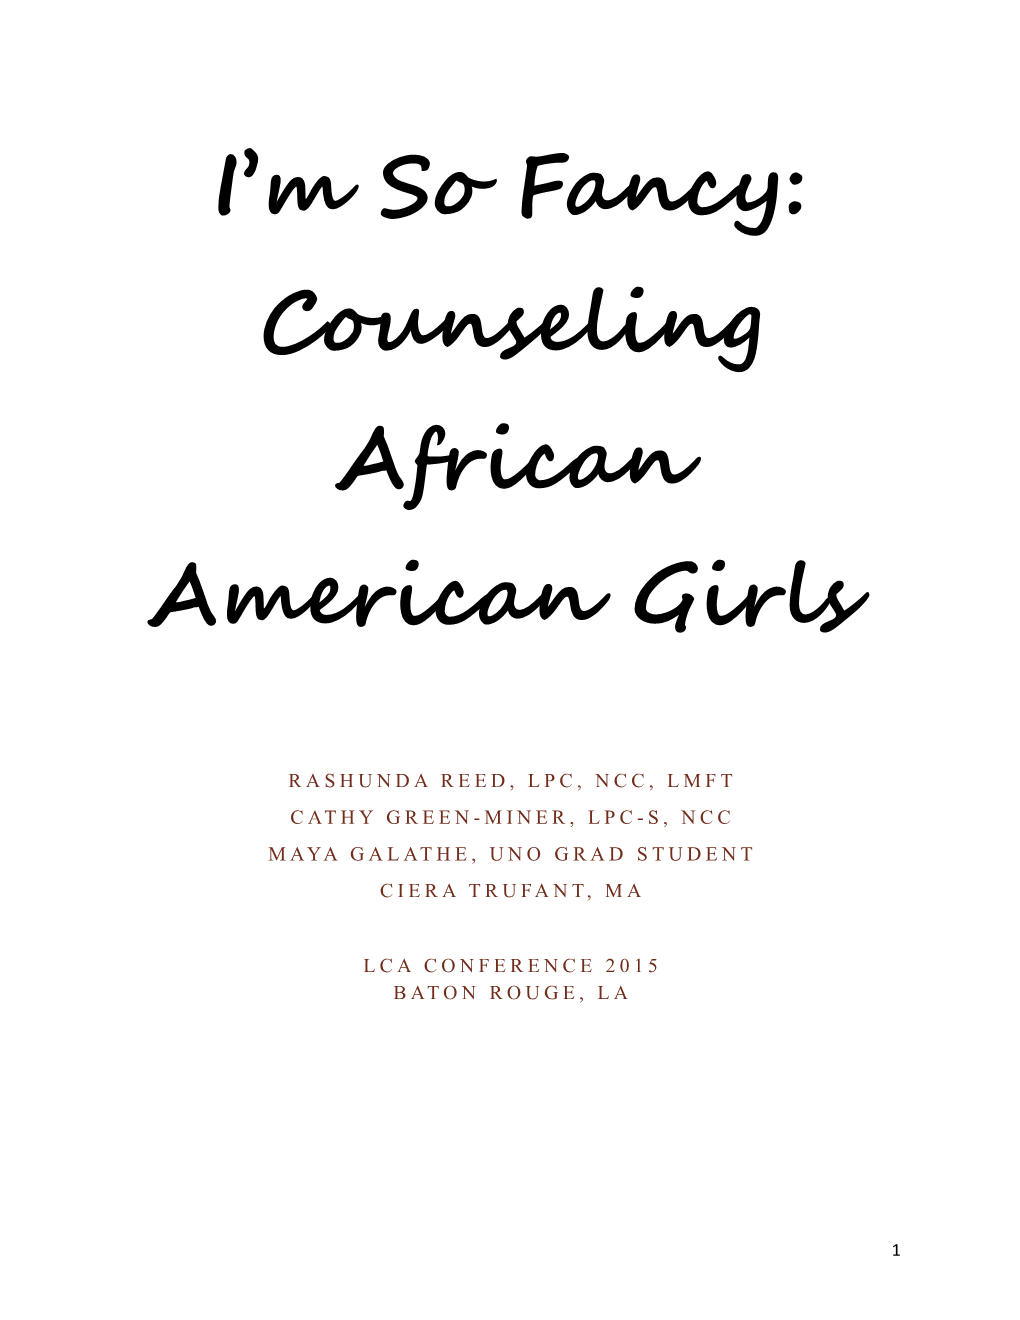 I M So Fancy: Counseling African American Girls